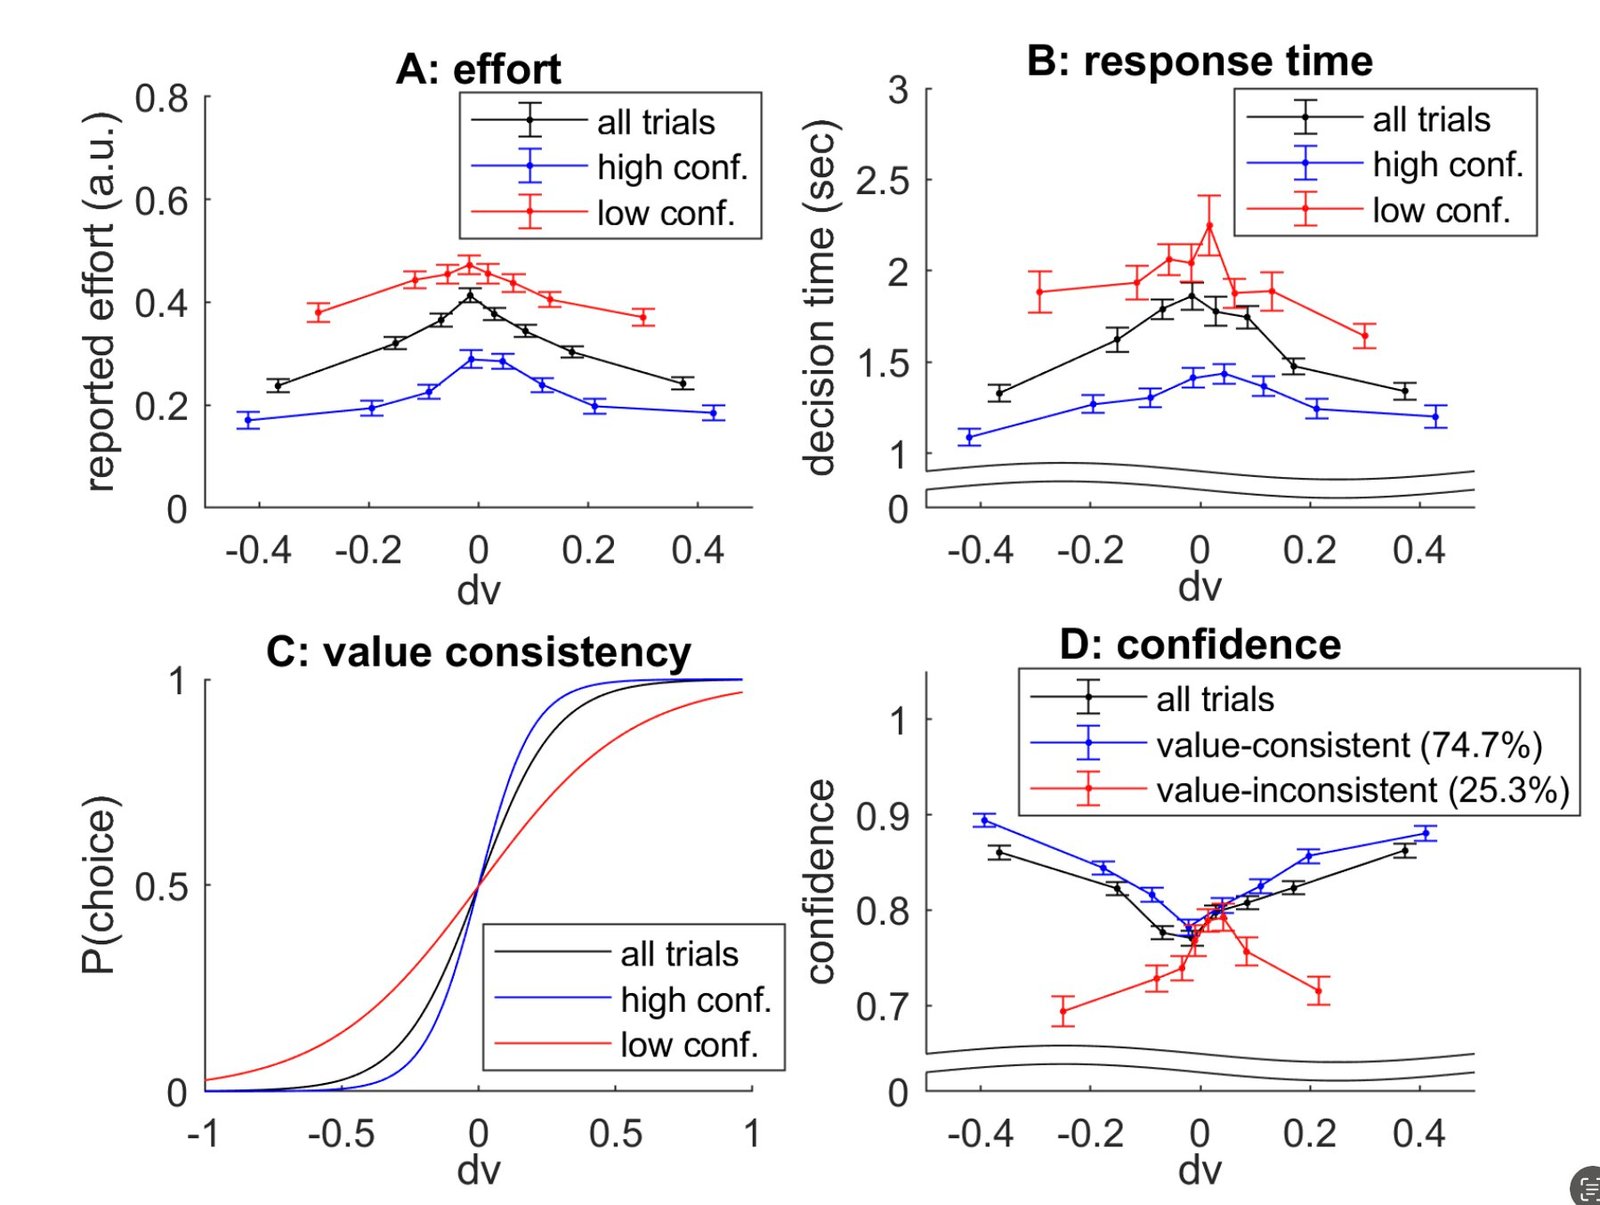 A minimal cognitive architecture reproduces control of human decision making processes